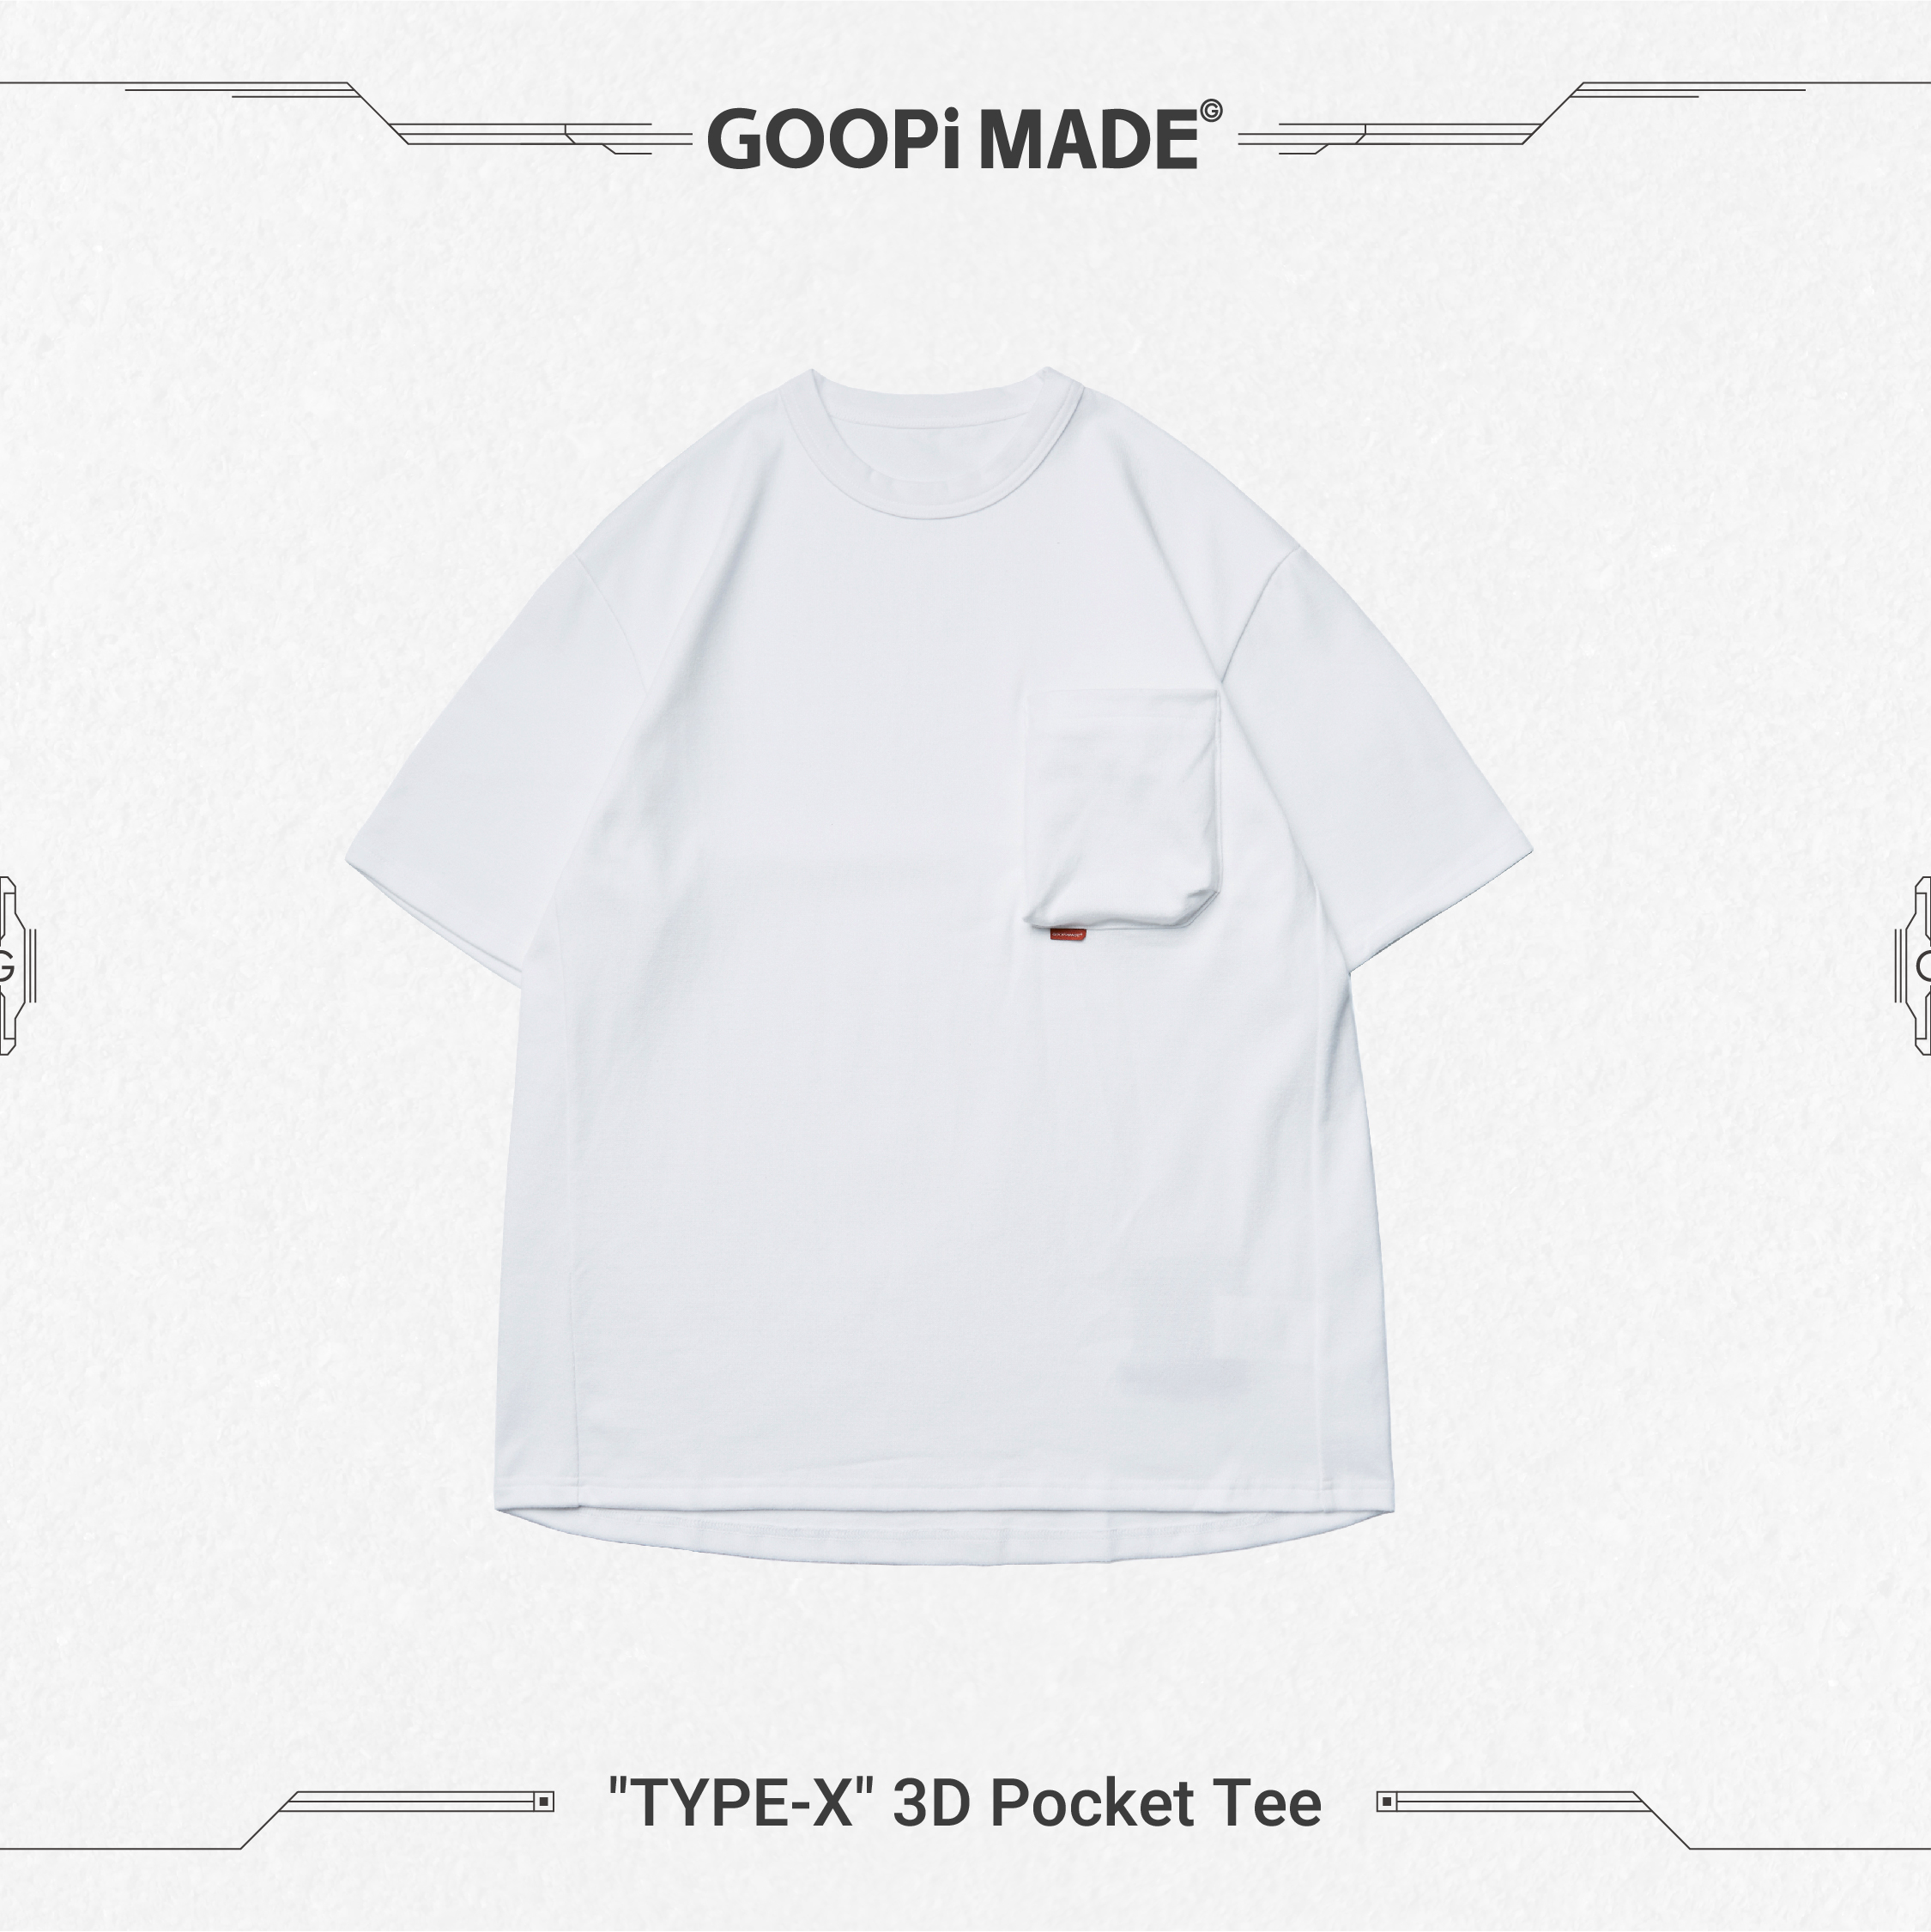 GOOPiMADE - GOOPiMADE® Type-X 3D Pocket T-shirt II  HBX - Globally Curated  Fashion and Lifestyle by Hypebeast